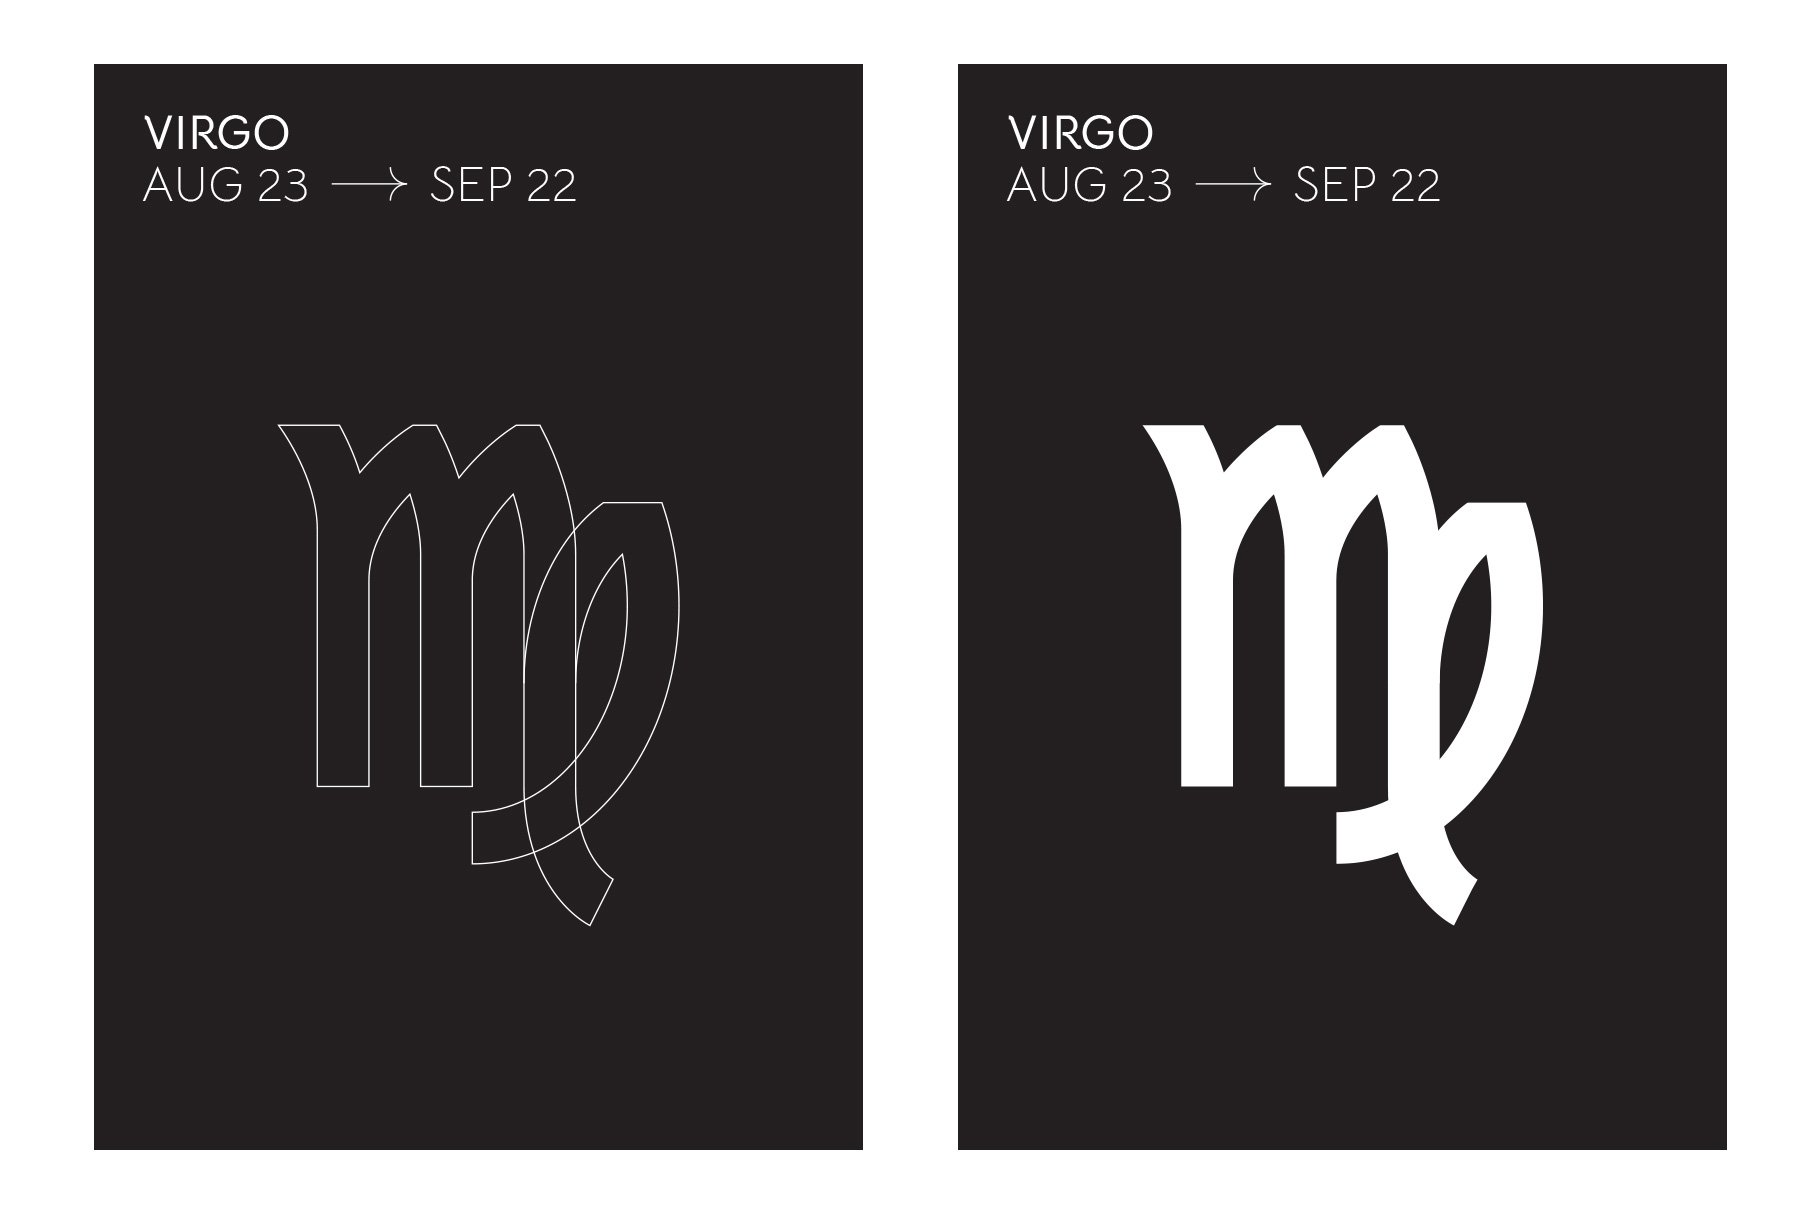 Outline and bold white Virgo graphic.